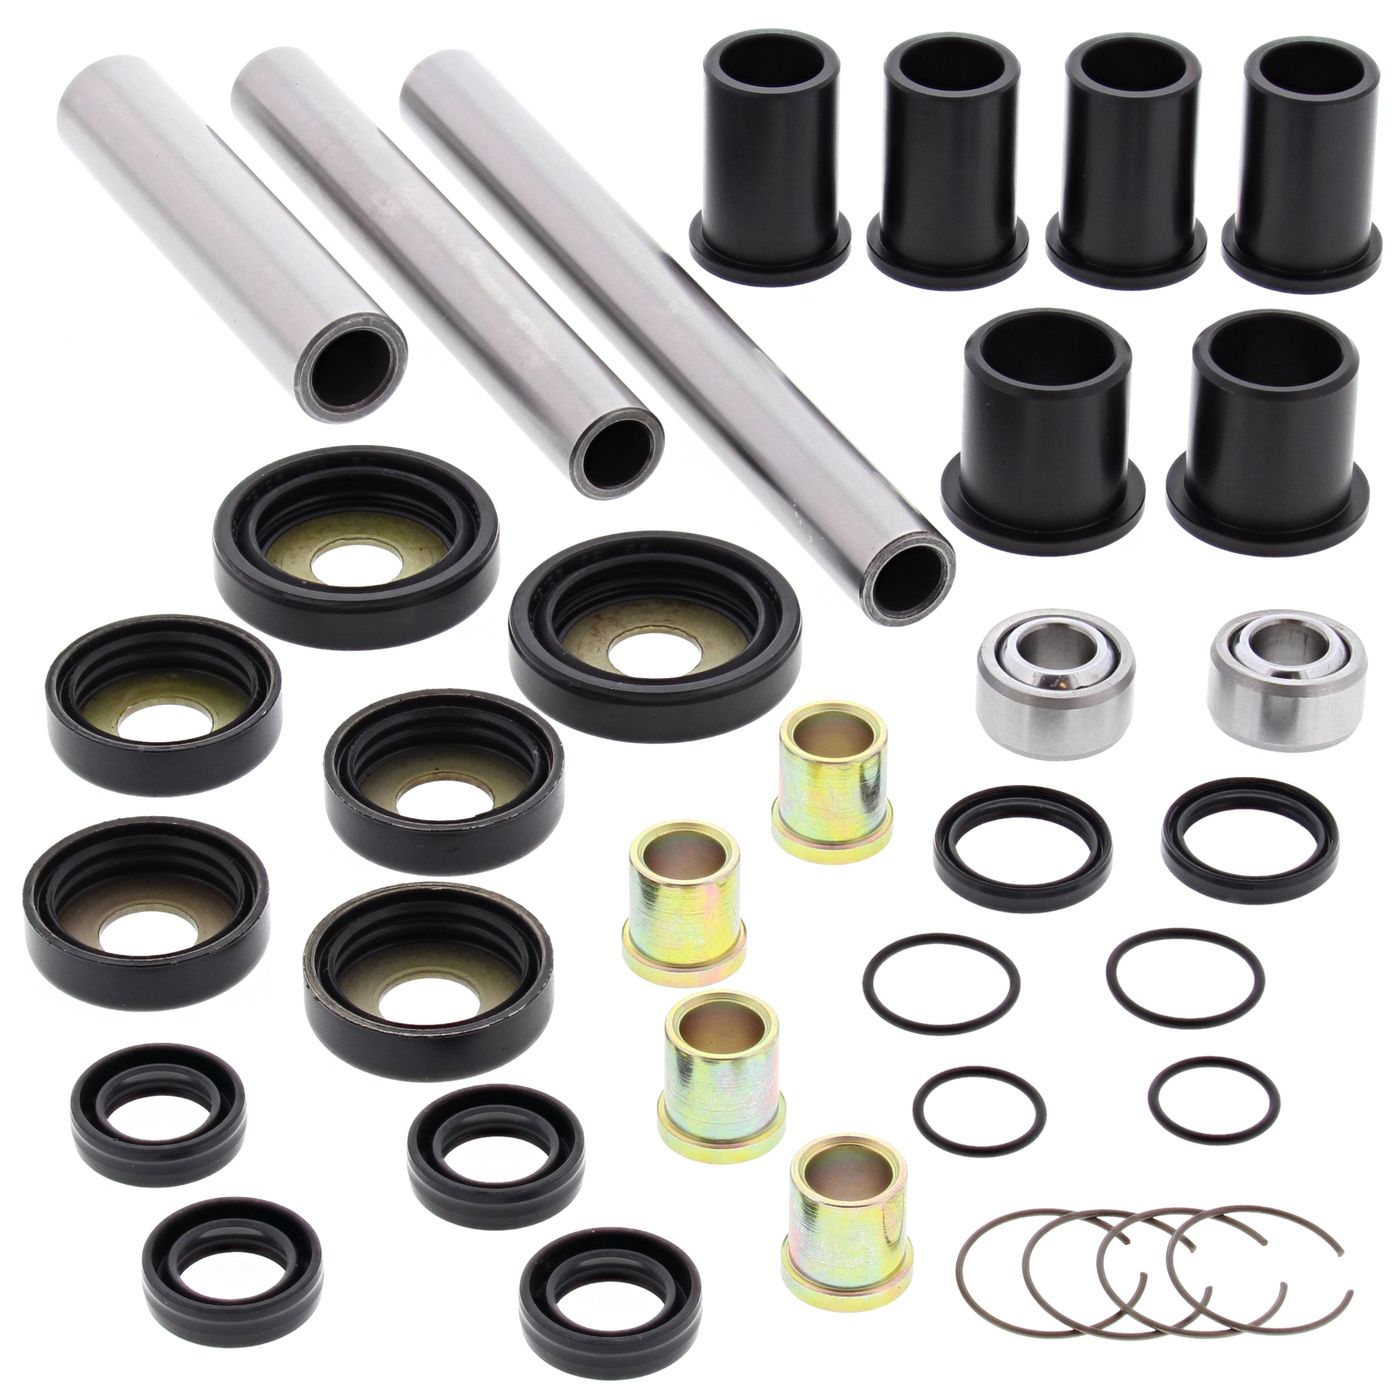 Wrp Rear Ind. Suspension Kits - WRP501035 image